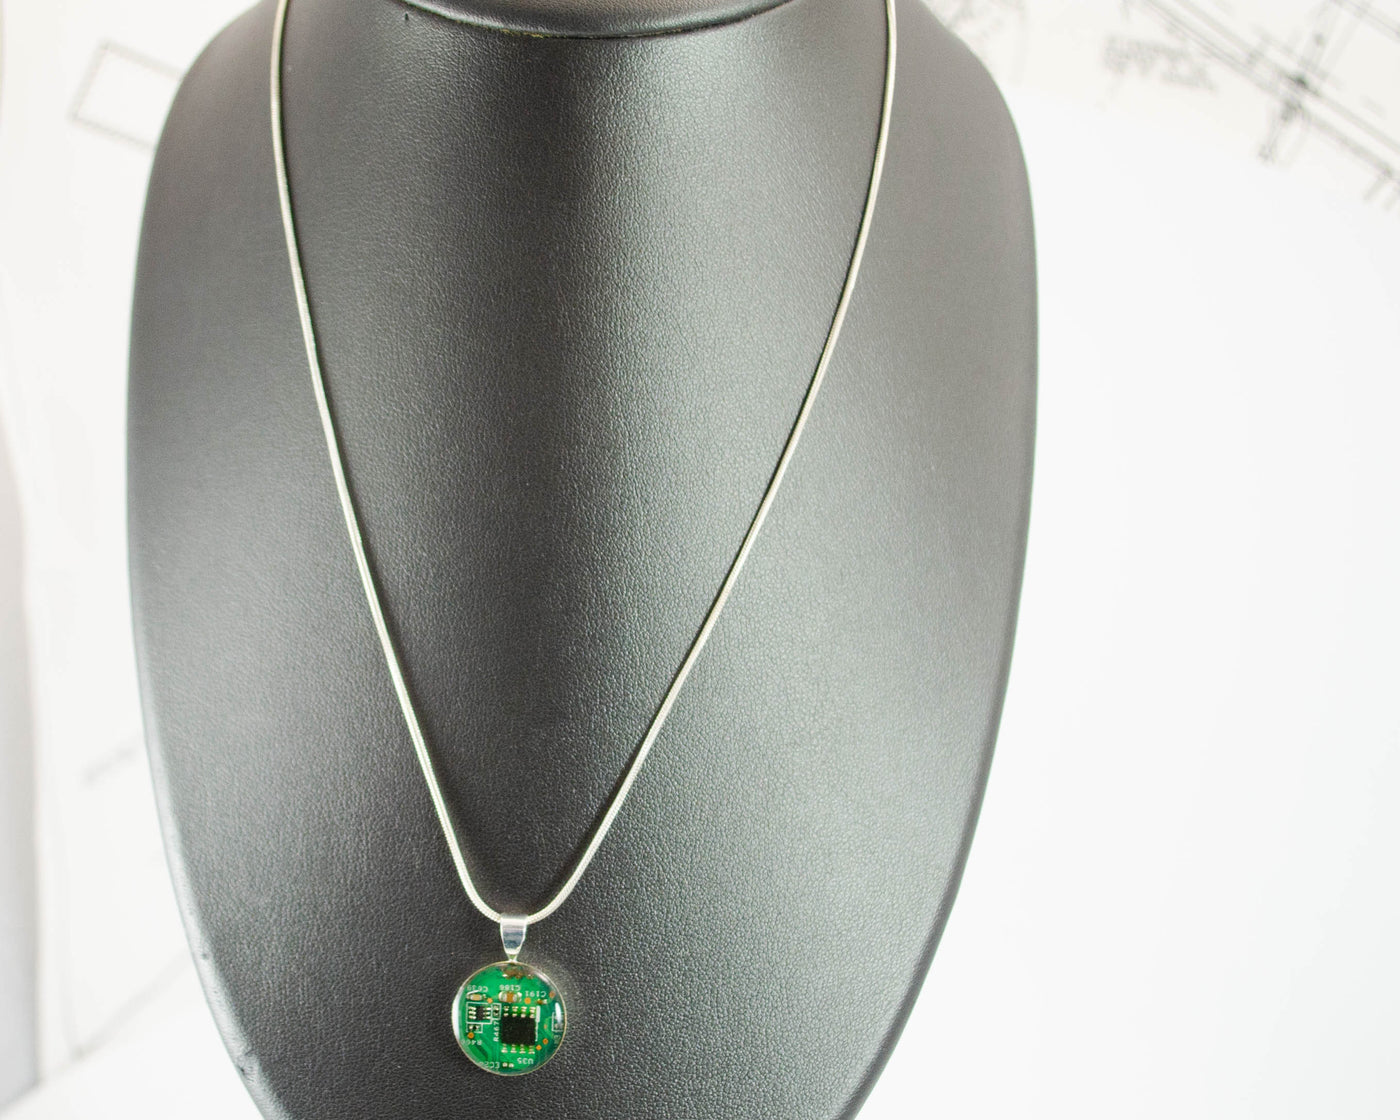 Recycled Circuit Board Necklace, Small Size, Green